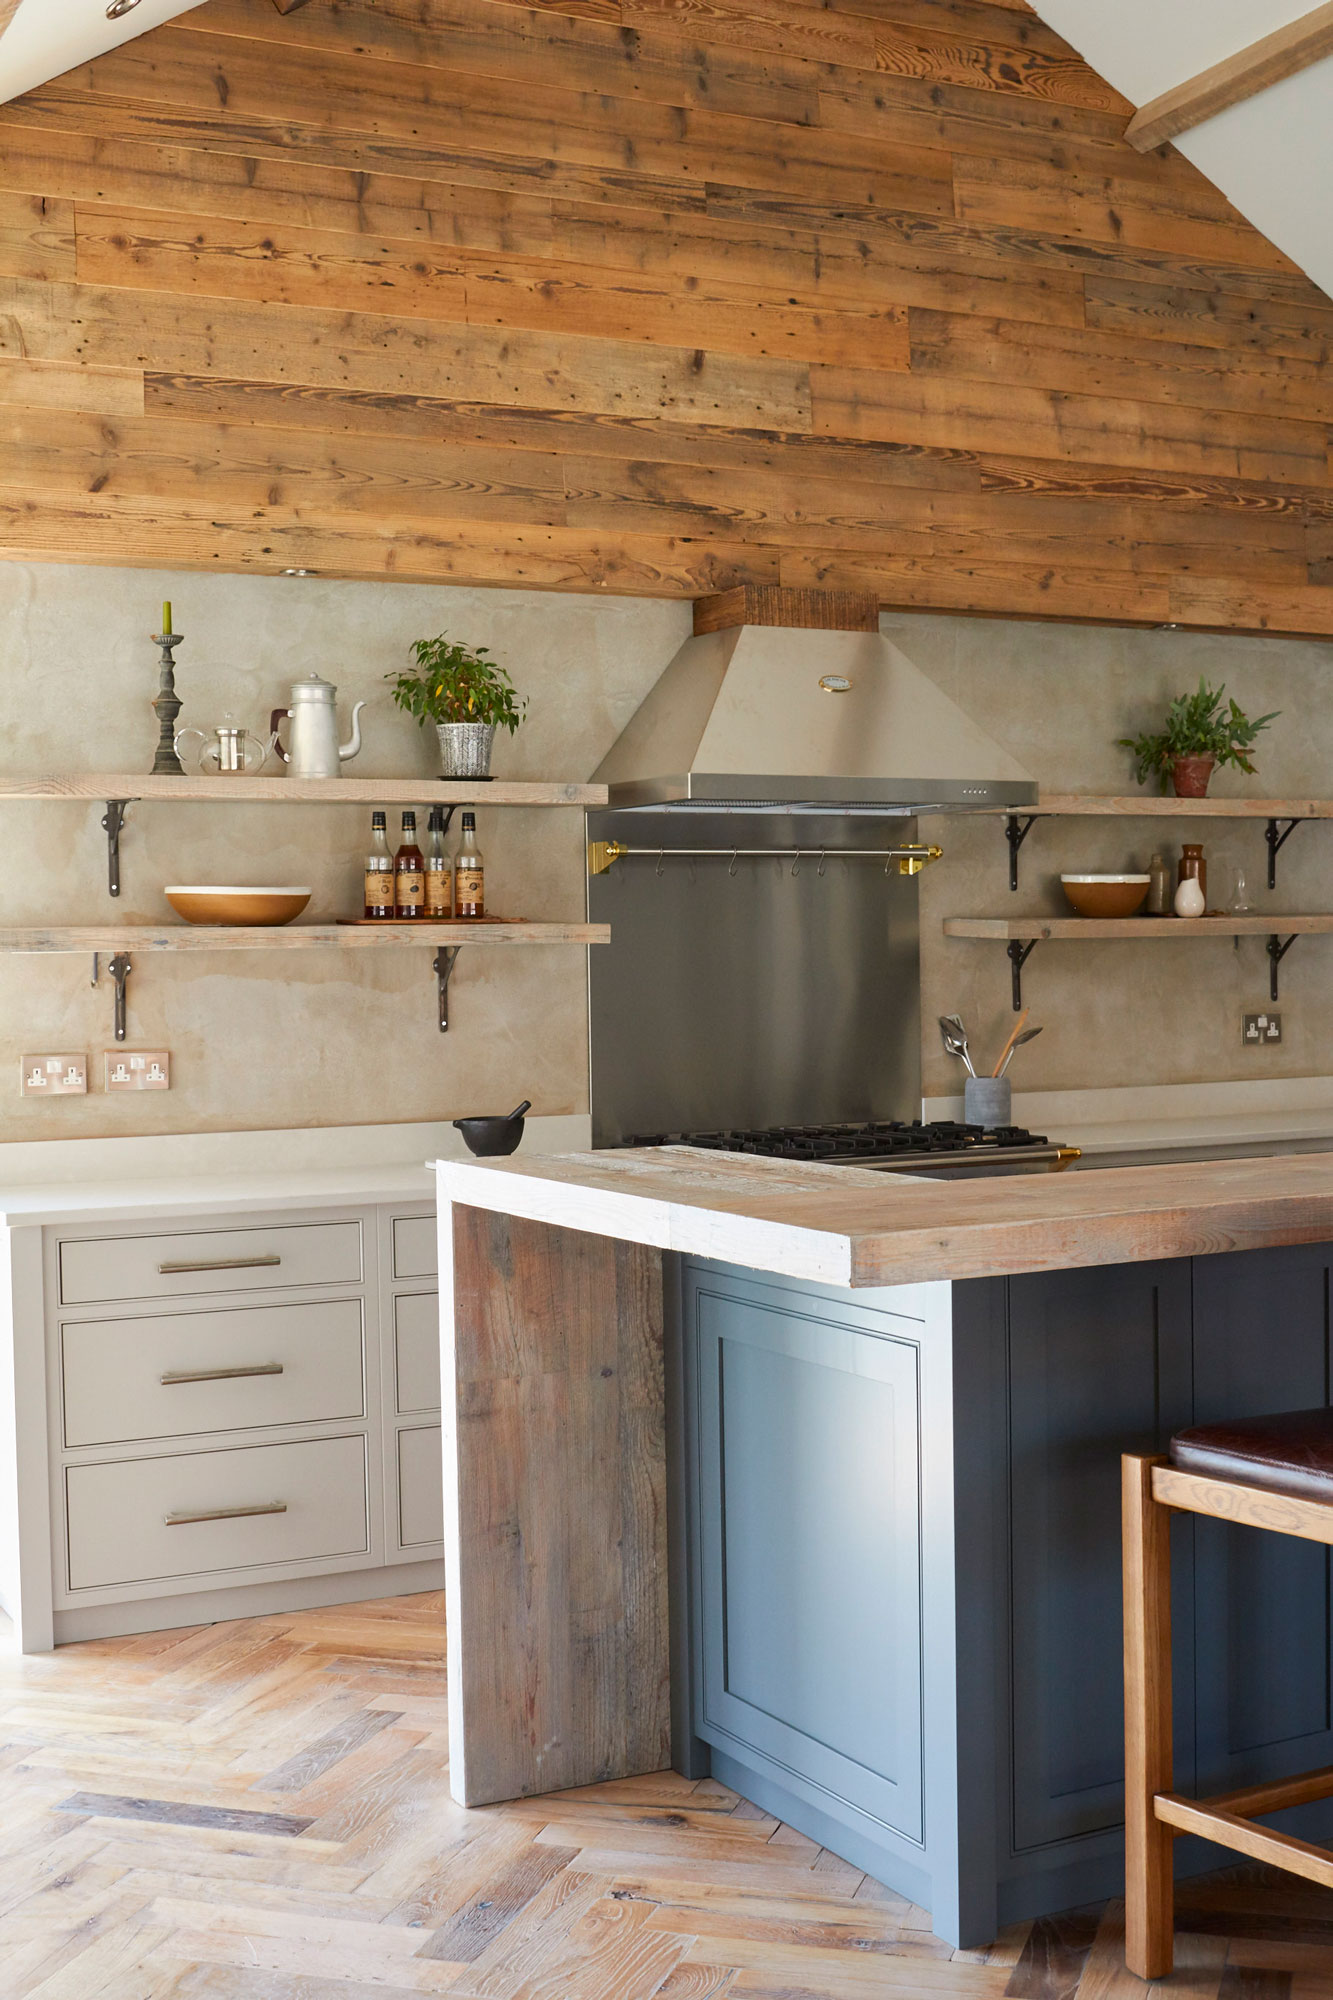 Painted kitchen with herringbone oak floor and cladded reclaimed wood wall